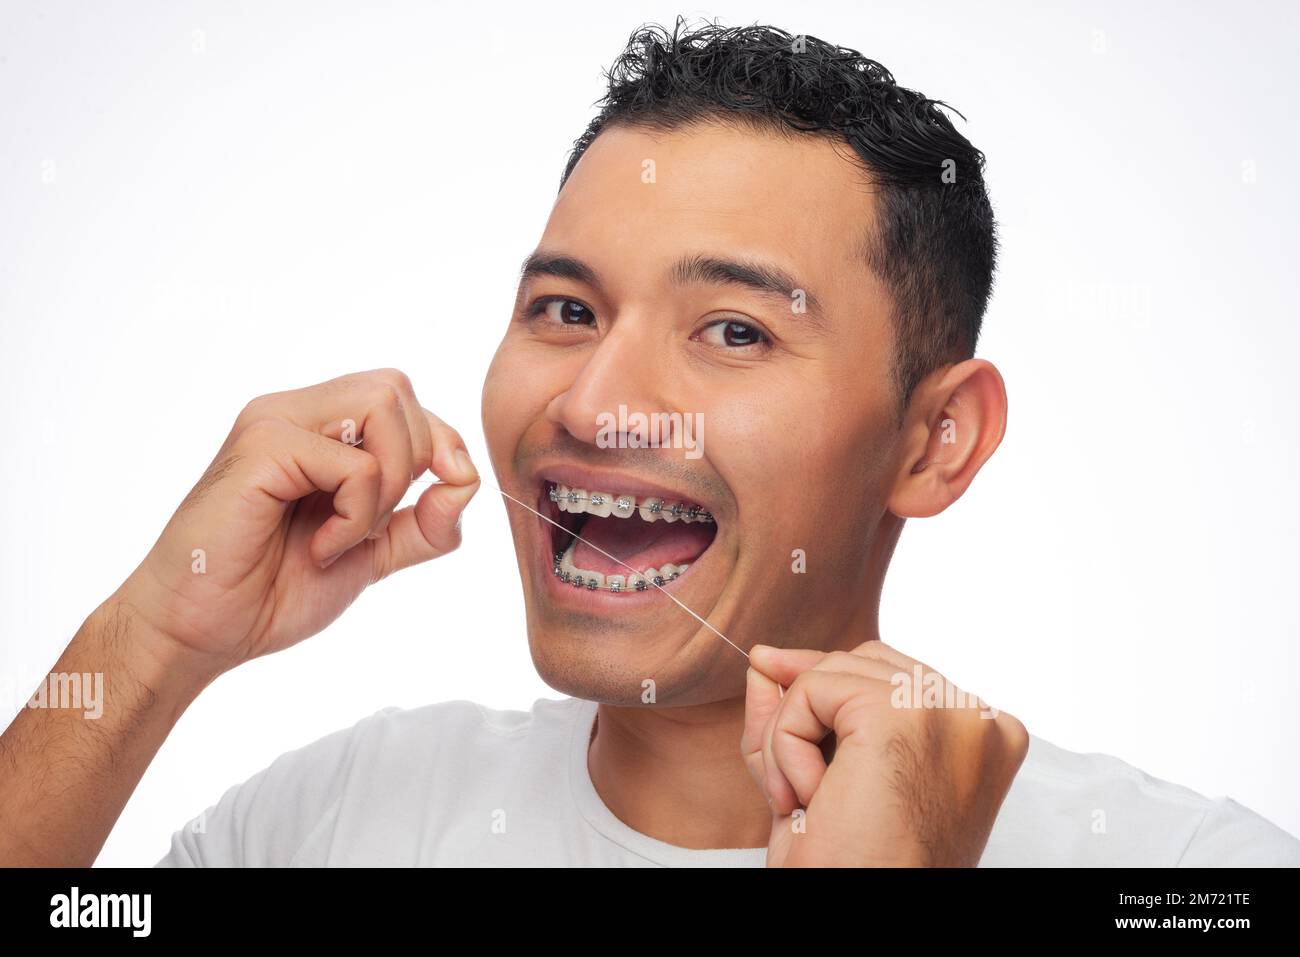 Hispanic man in T-shirt smiles as he flosses his teeth with orthodontic treatment brackets on a white background, one person Stock Photo